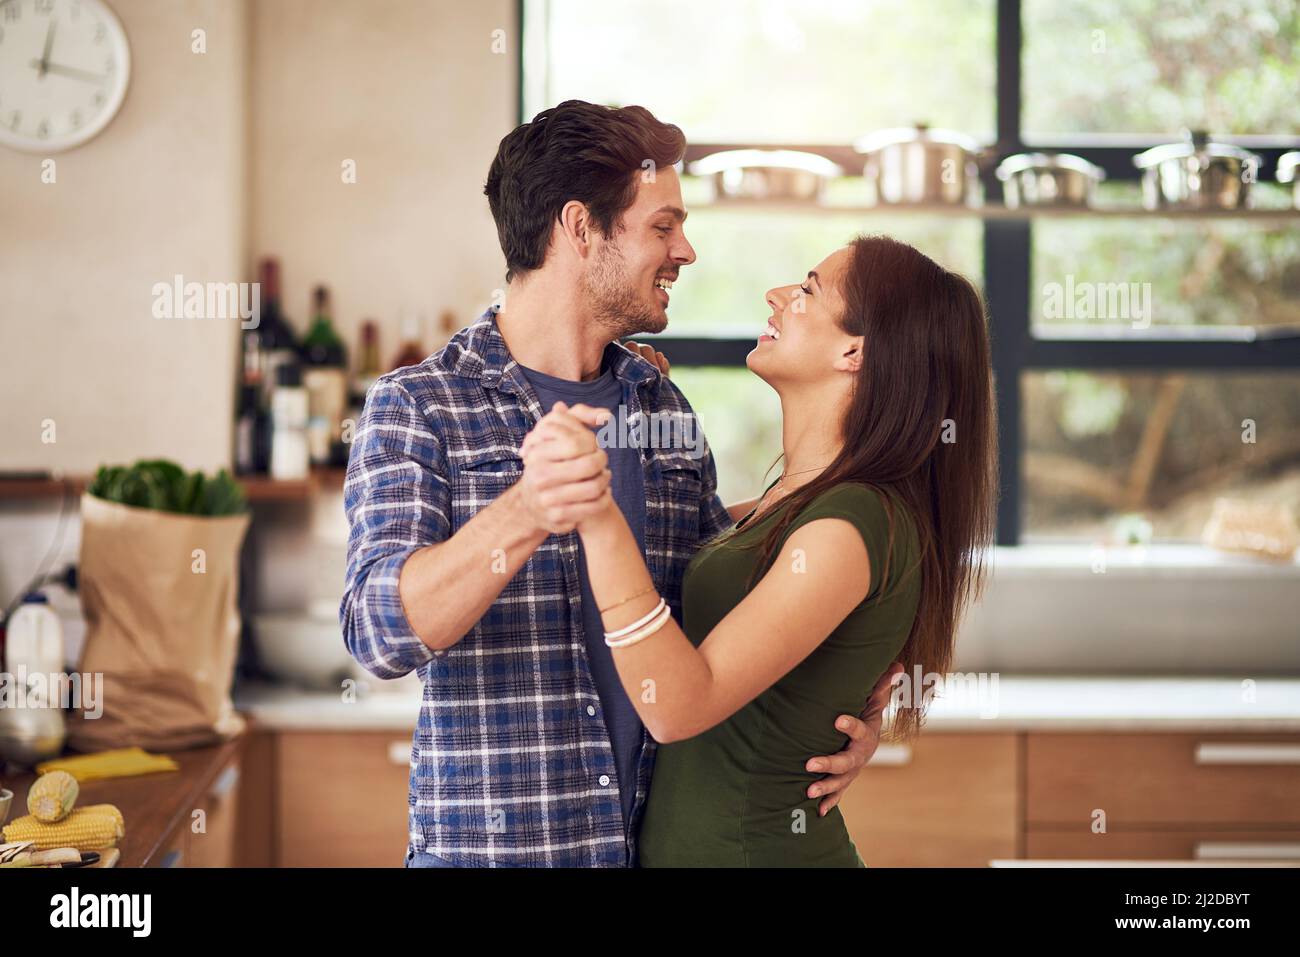 Love makes us lighthearted. Shot of a happy young couple dancing in their kitchen at home. Stock Photo